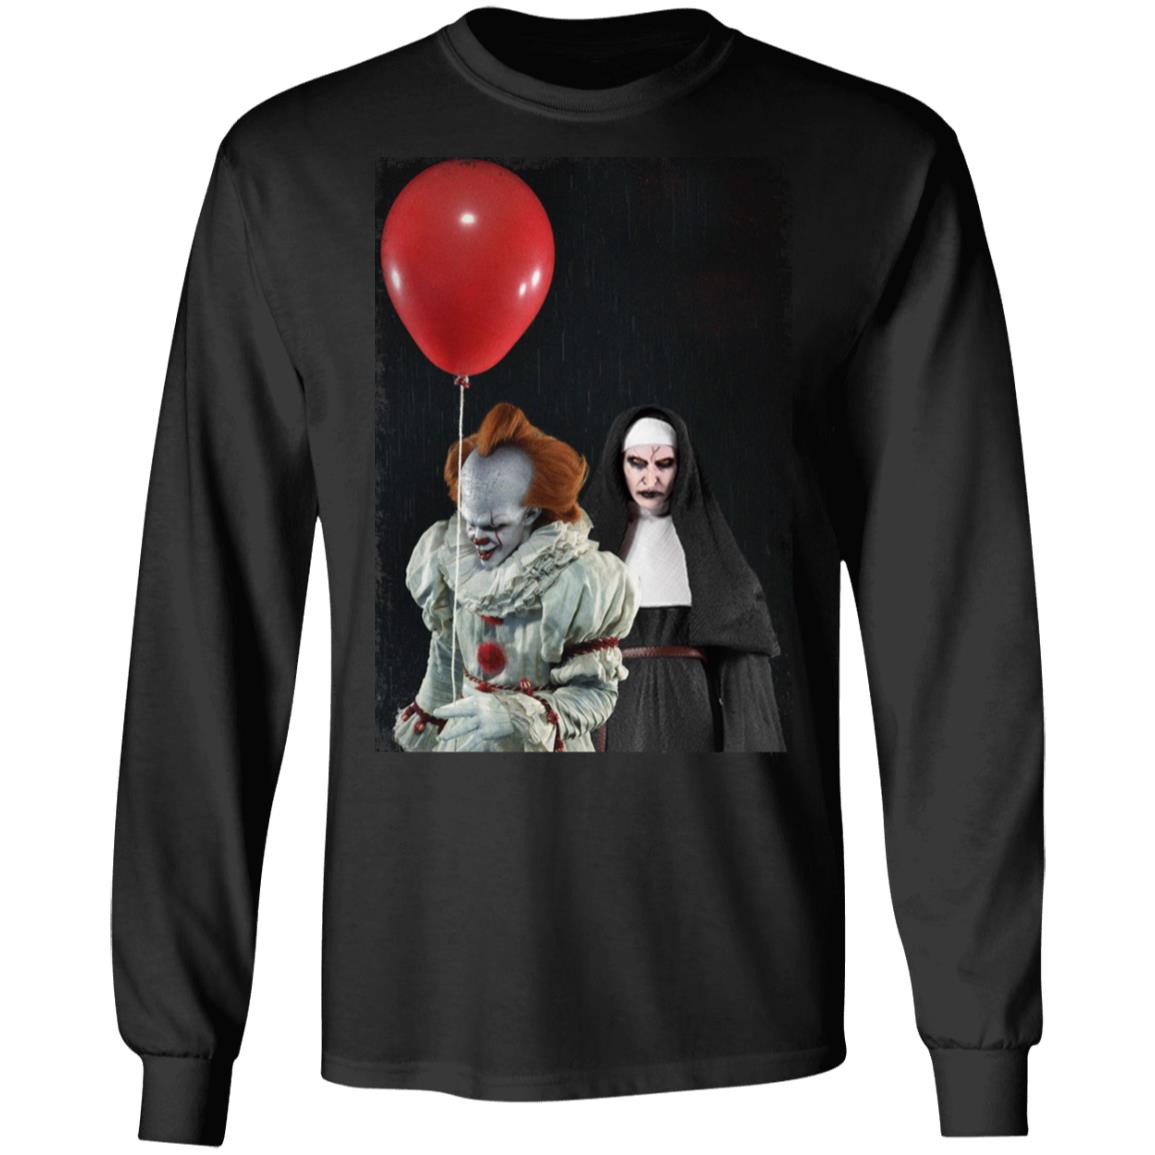 Pennywise IT And Valak The Nun Horror Movie Character Shirt